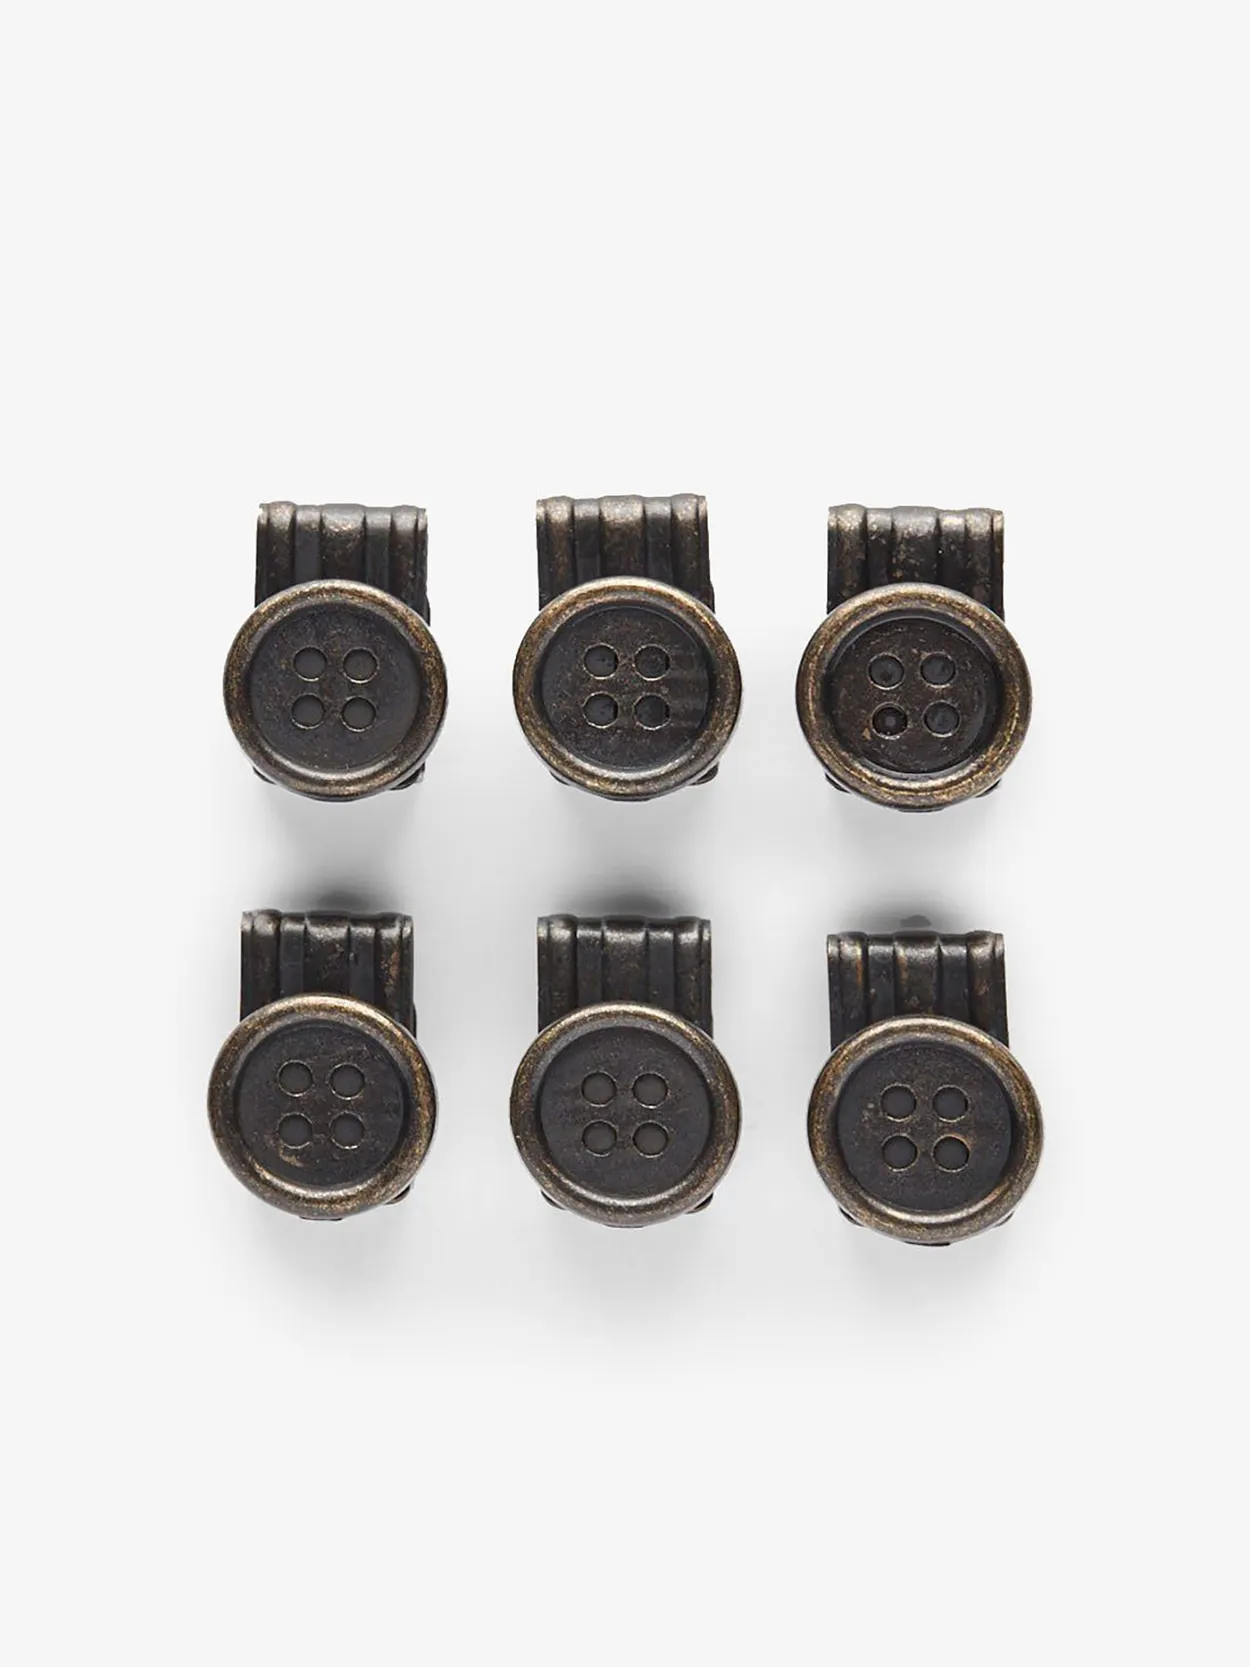 ButtonMode Suspender Brace Pant Buttons Set Includes 1-Dozen Pants Buttons  Measuring 17mm (slightly more than 5/8 Inch), Brown Dark, 12-Buttons